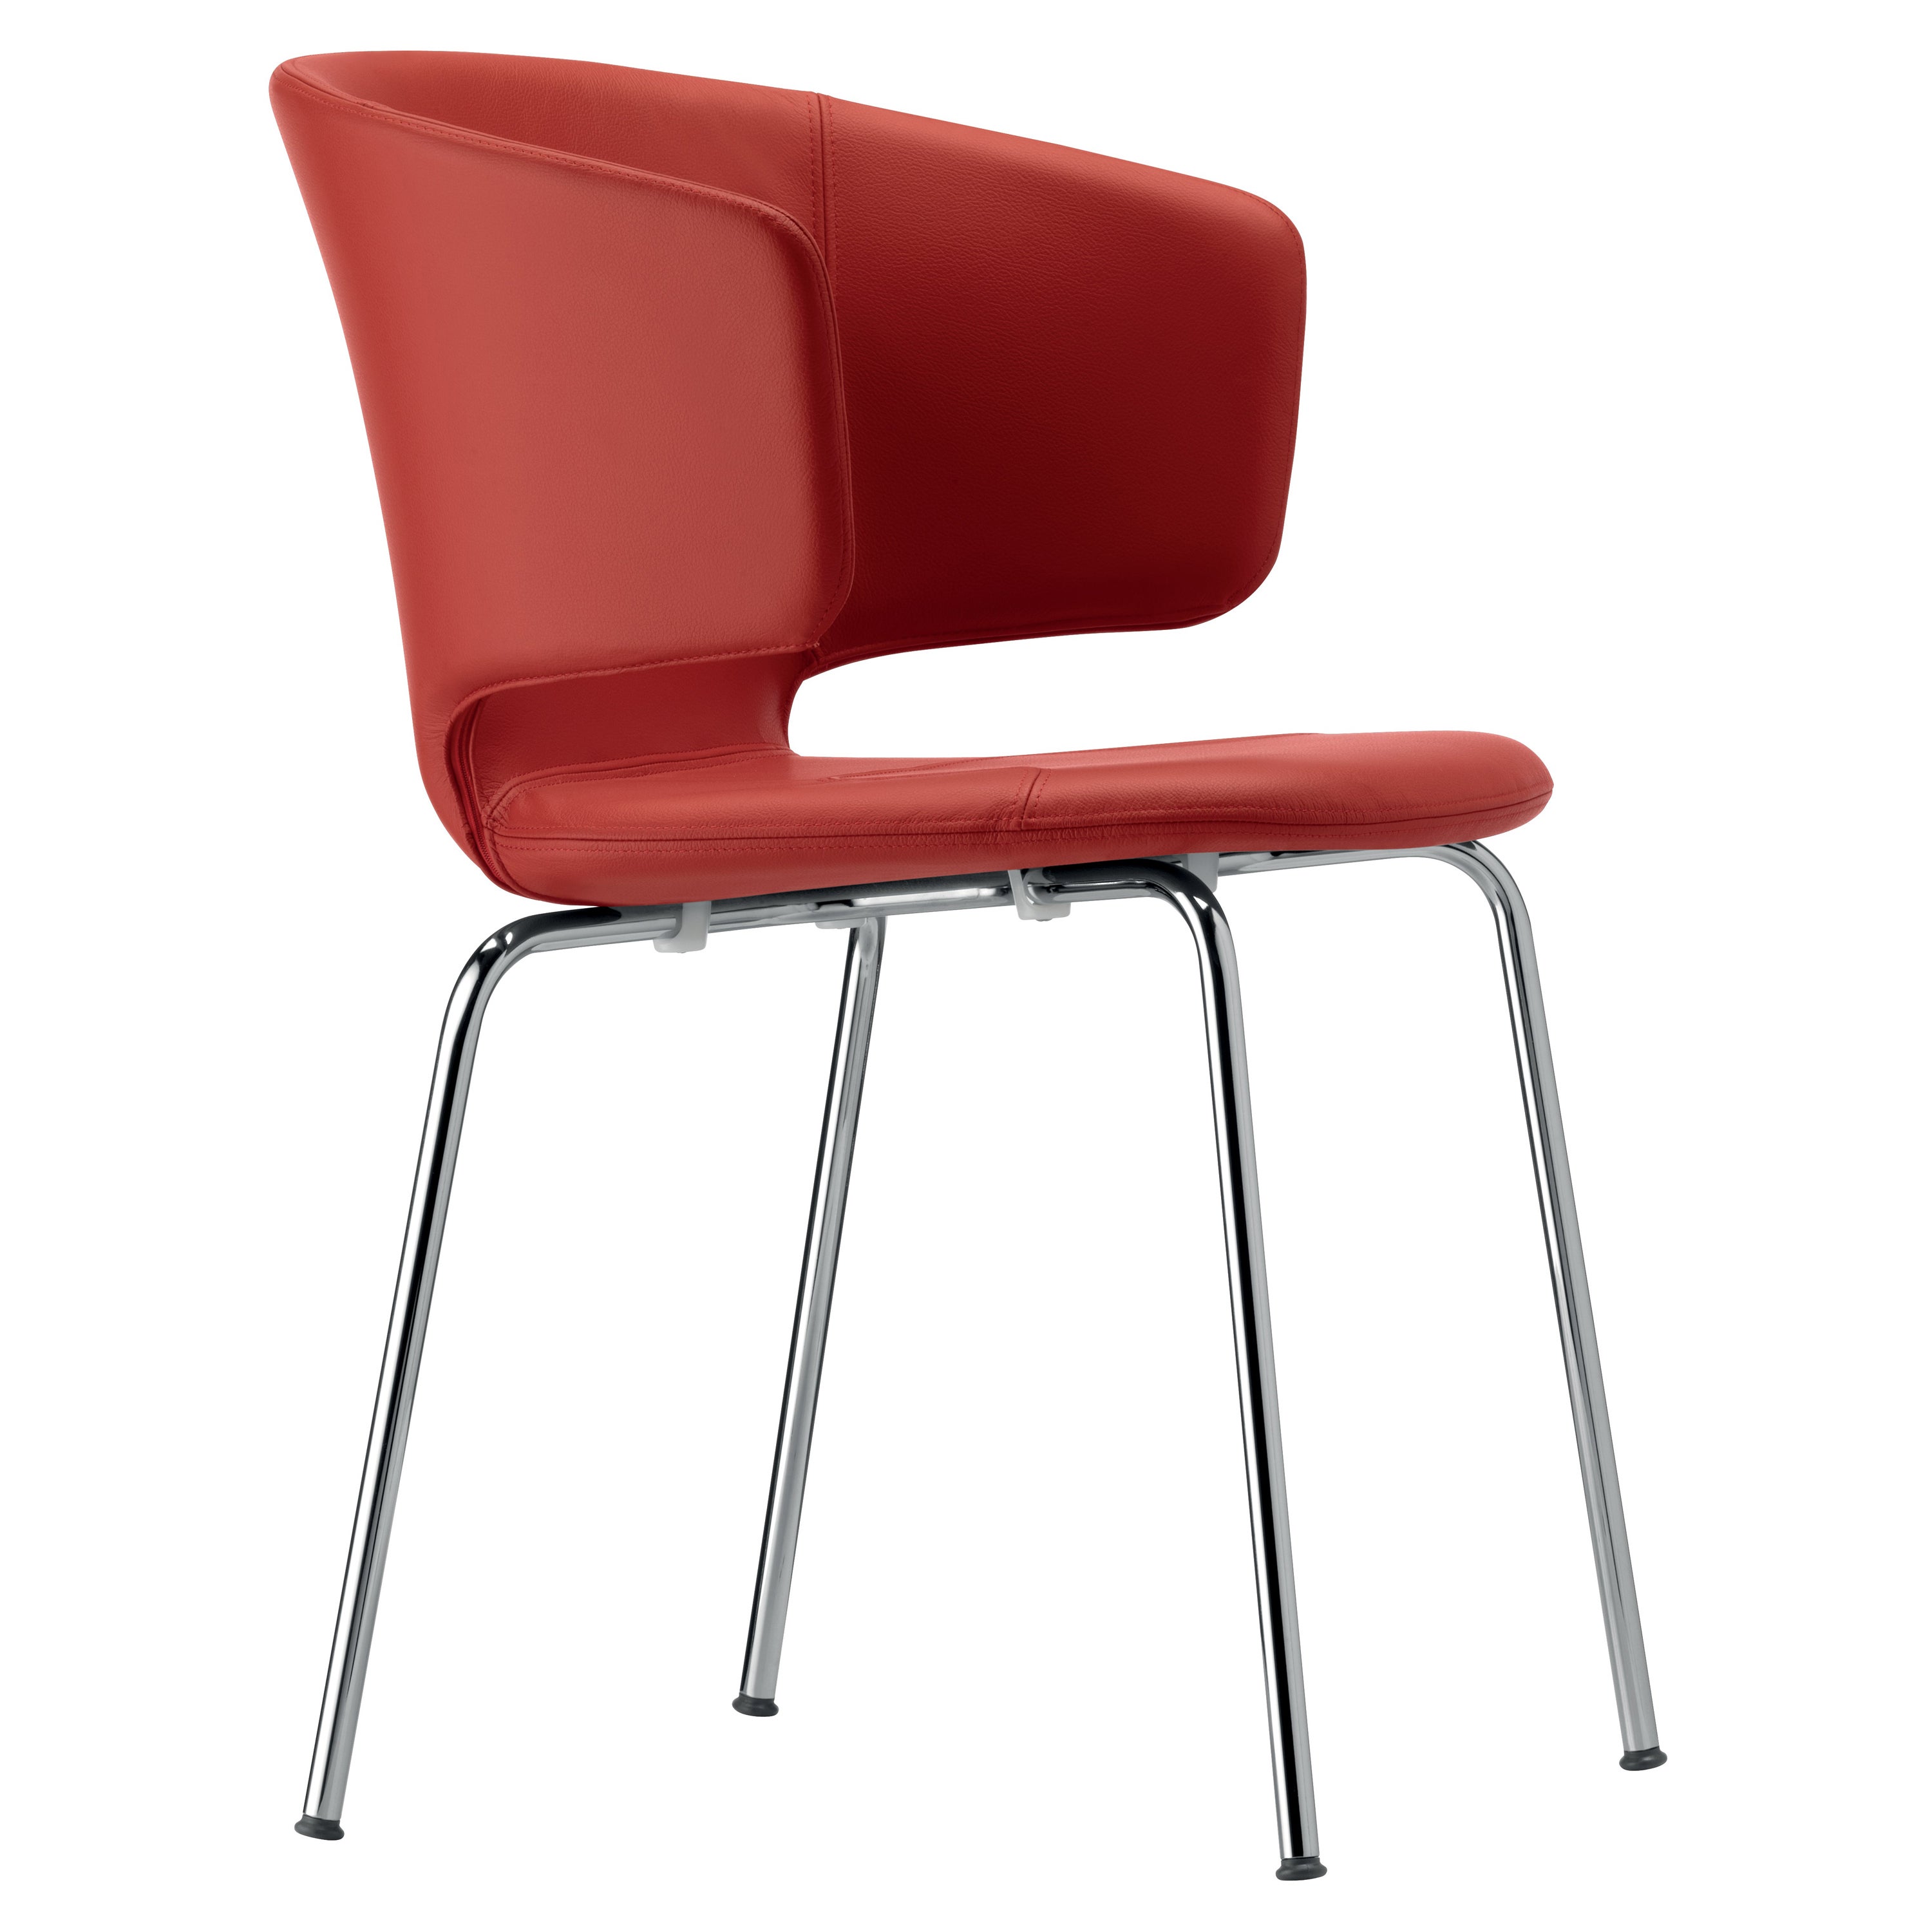 Alias 503 Taormina Chair in Red Seat and Chromed Steel Frame by Alfredo Häberli For Sale